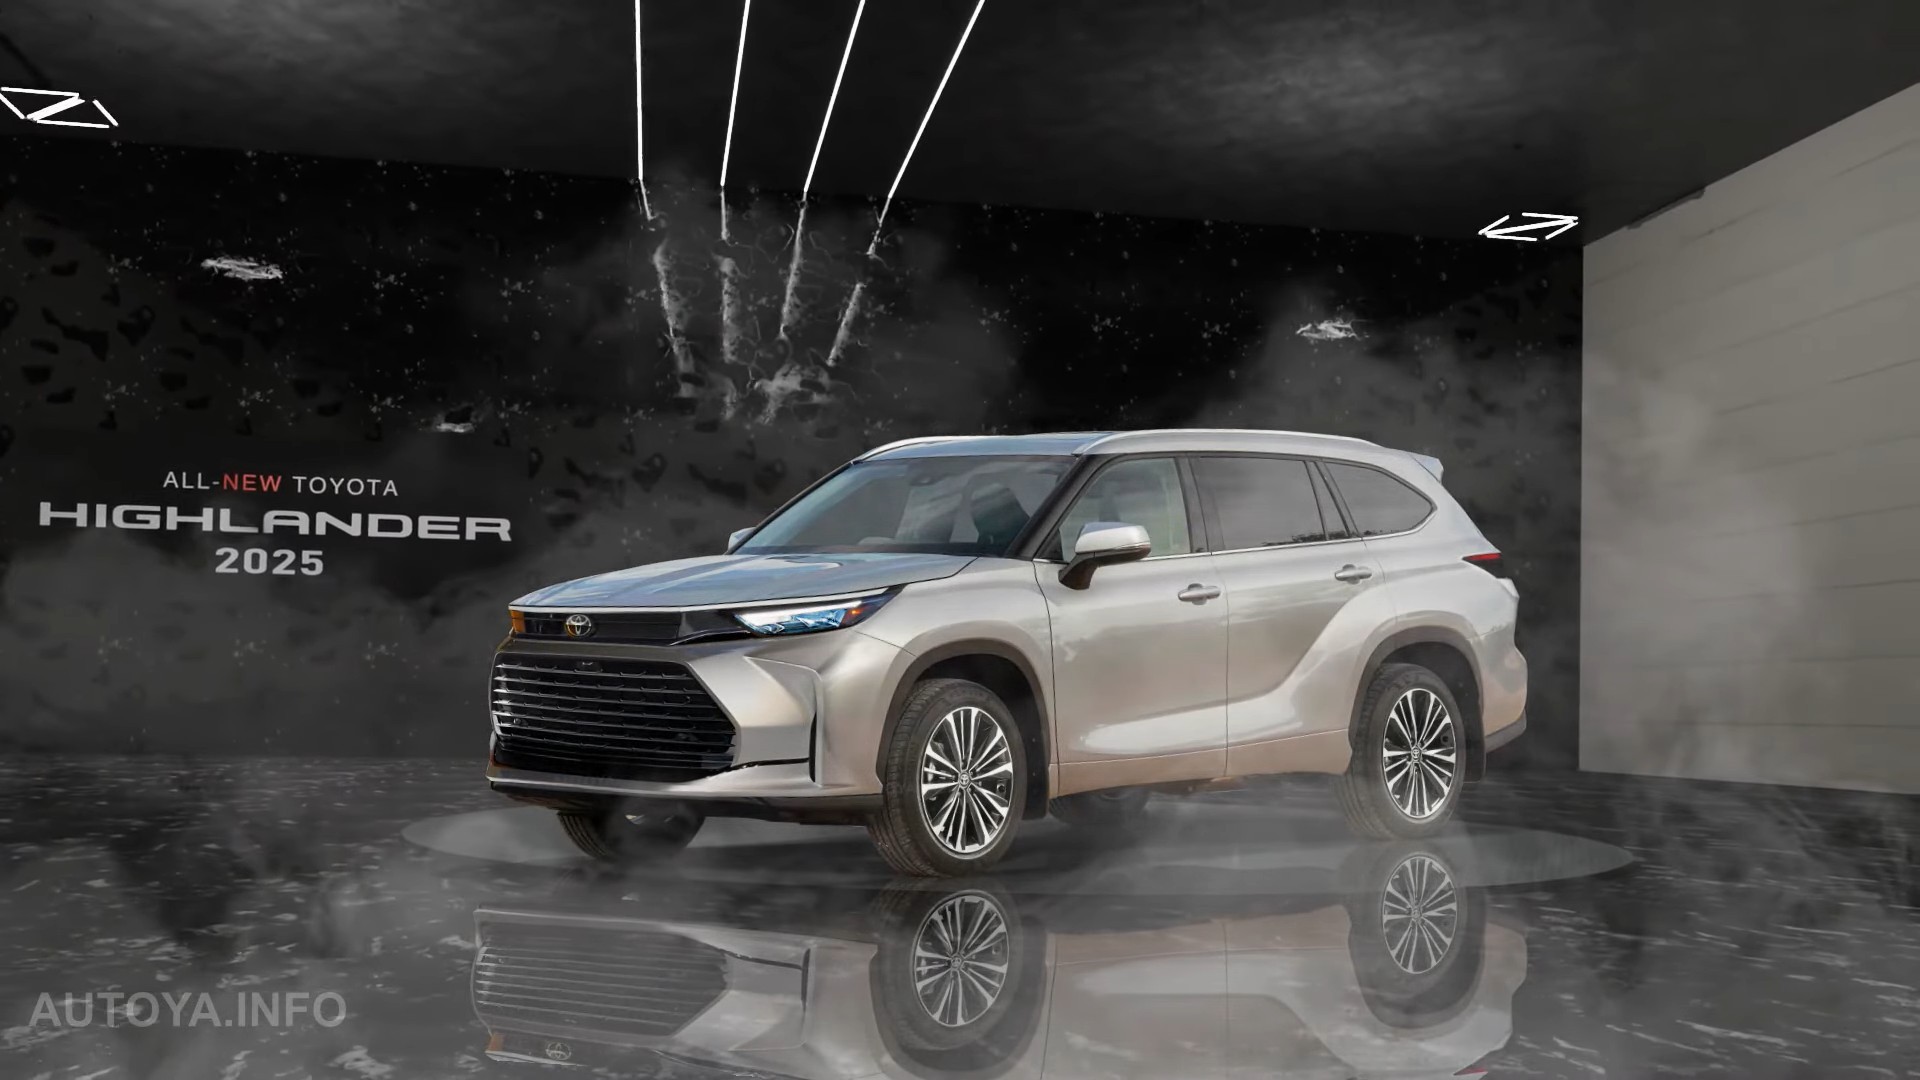 Facelifted 2025 Toyota Highlander Gets Revealed Early Across Imagination  Land - autoevolution